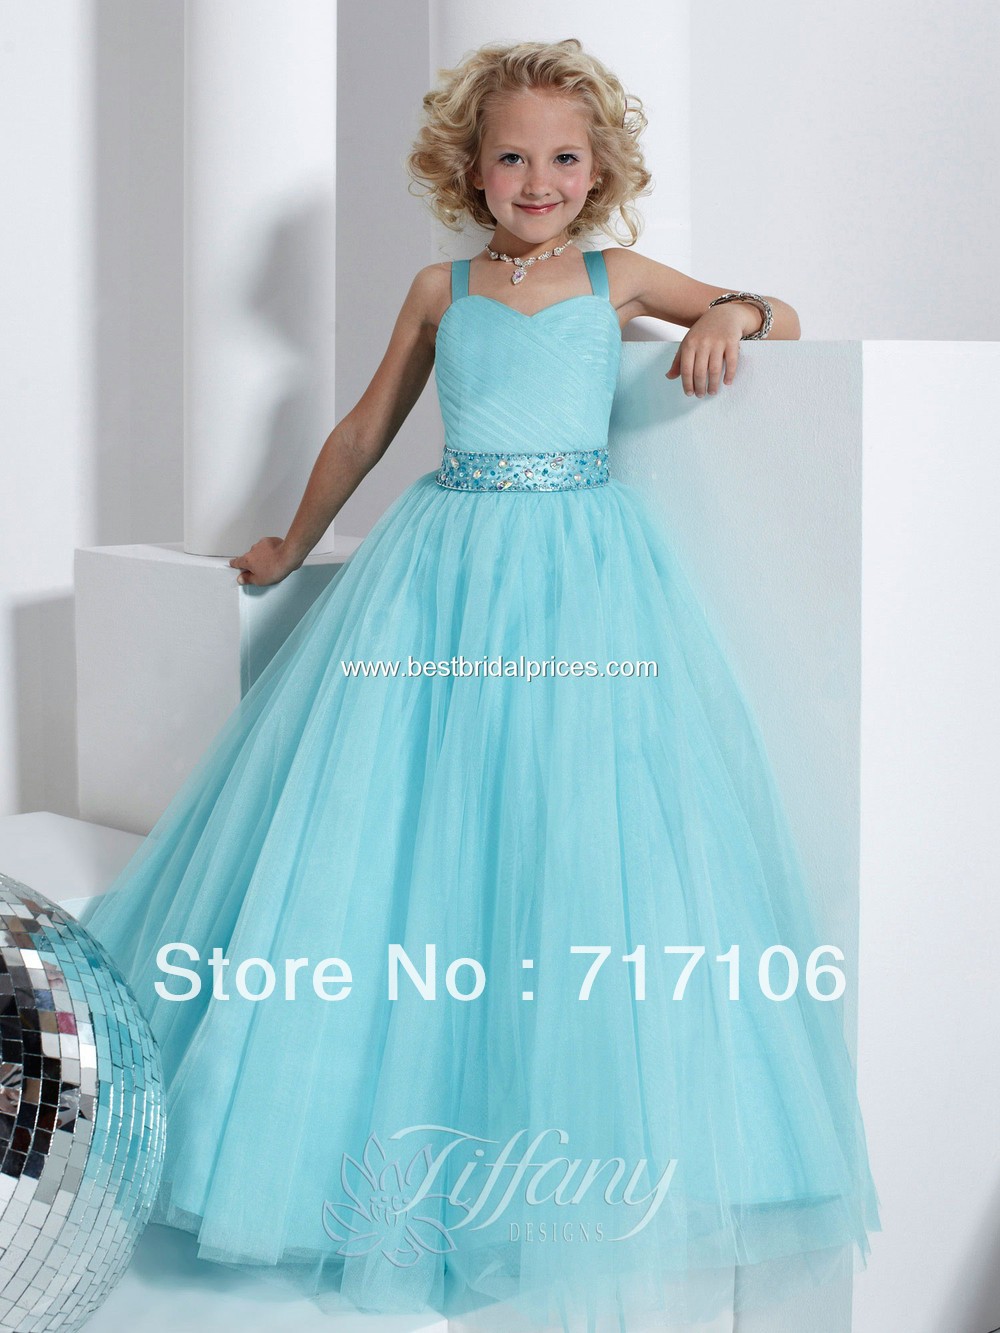 F12 Free Shipping Fashion New Beaded Organza Lovely Pageant Girl's Party Princess Flower Girl Dresses Gowns